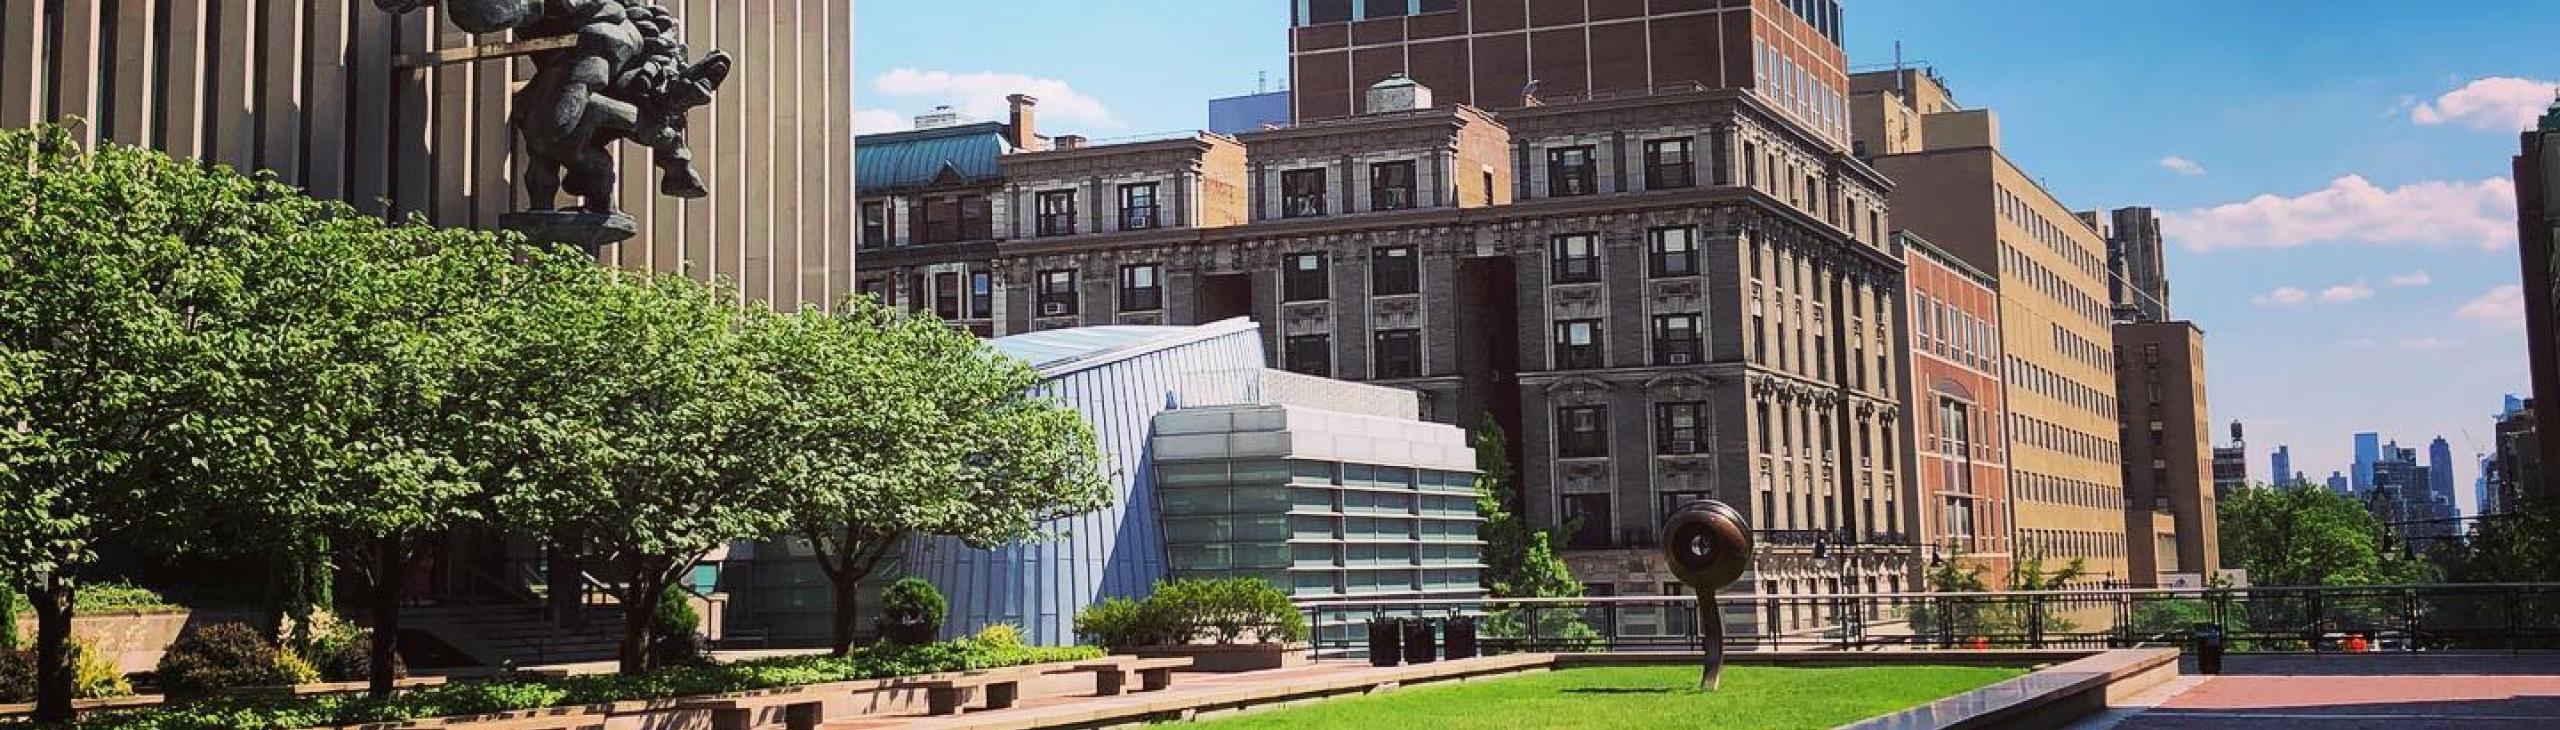 buildings on Columbia University campus on a sunny day